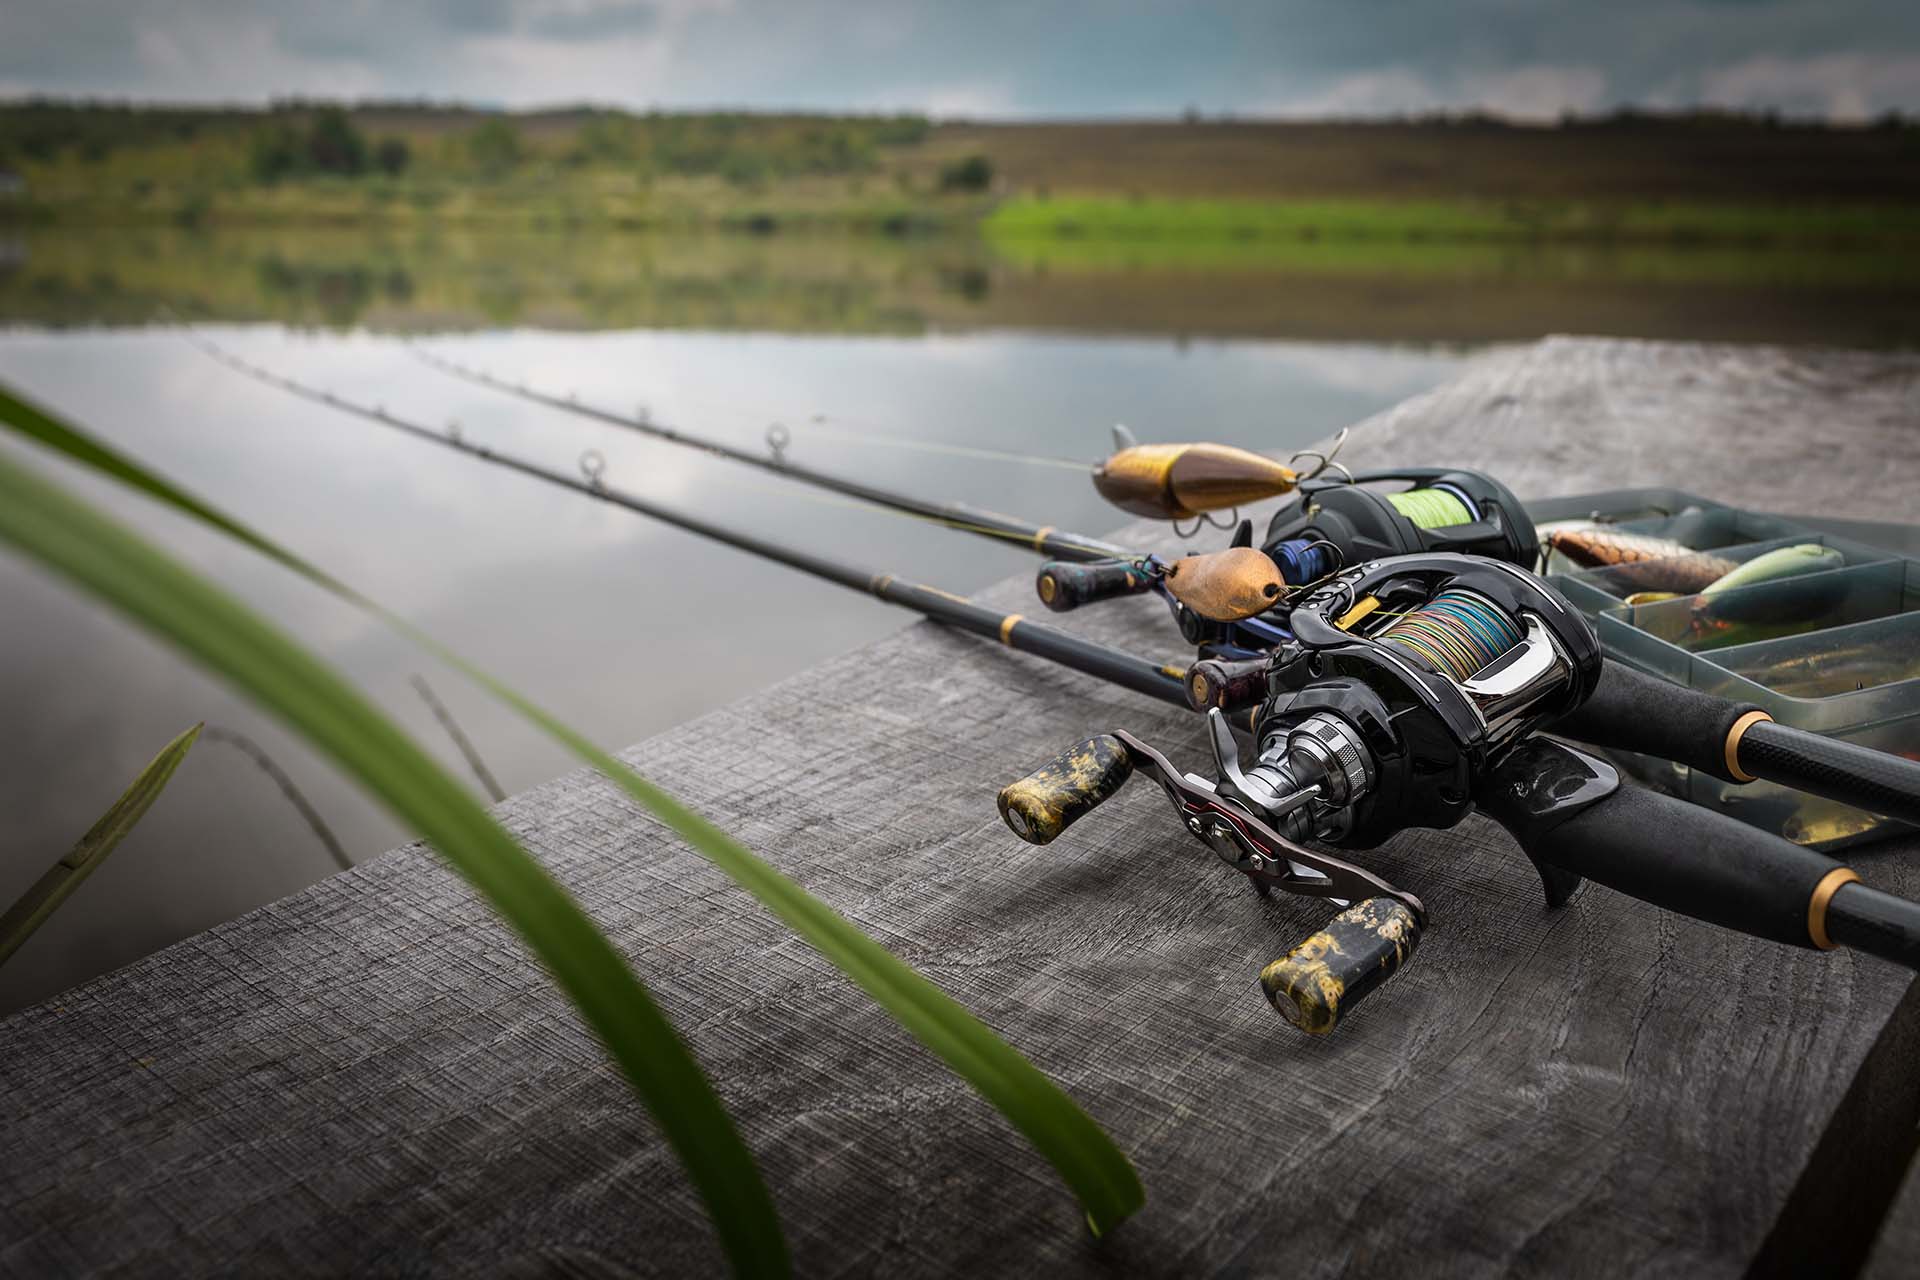 Baitcasting rods and reels